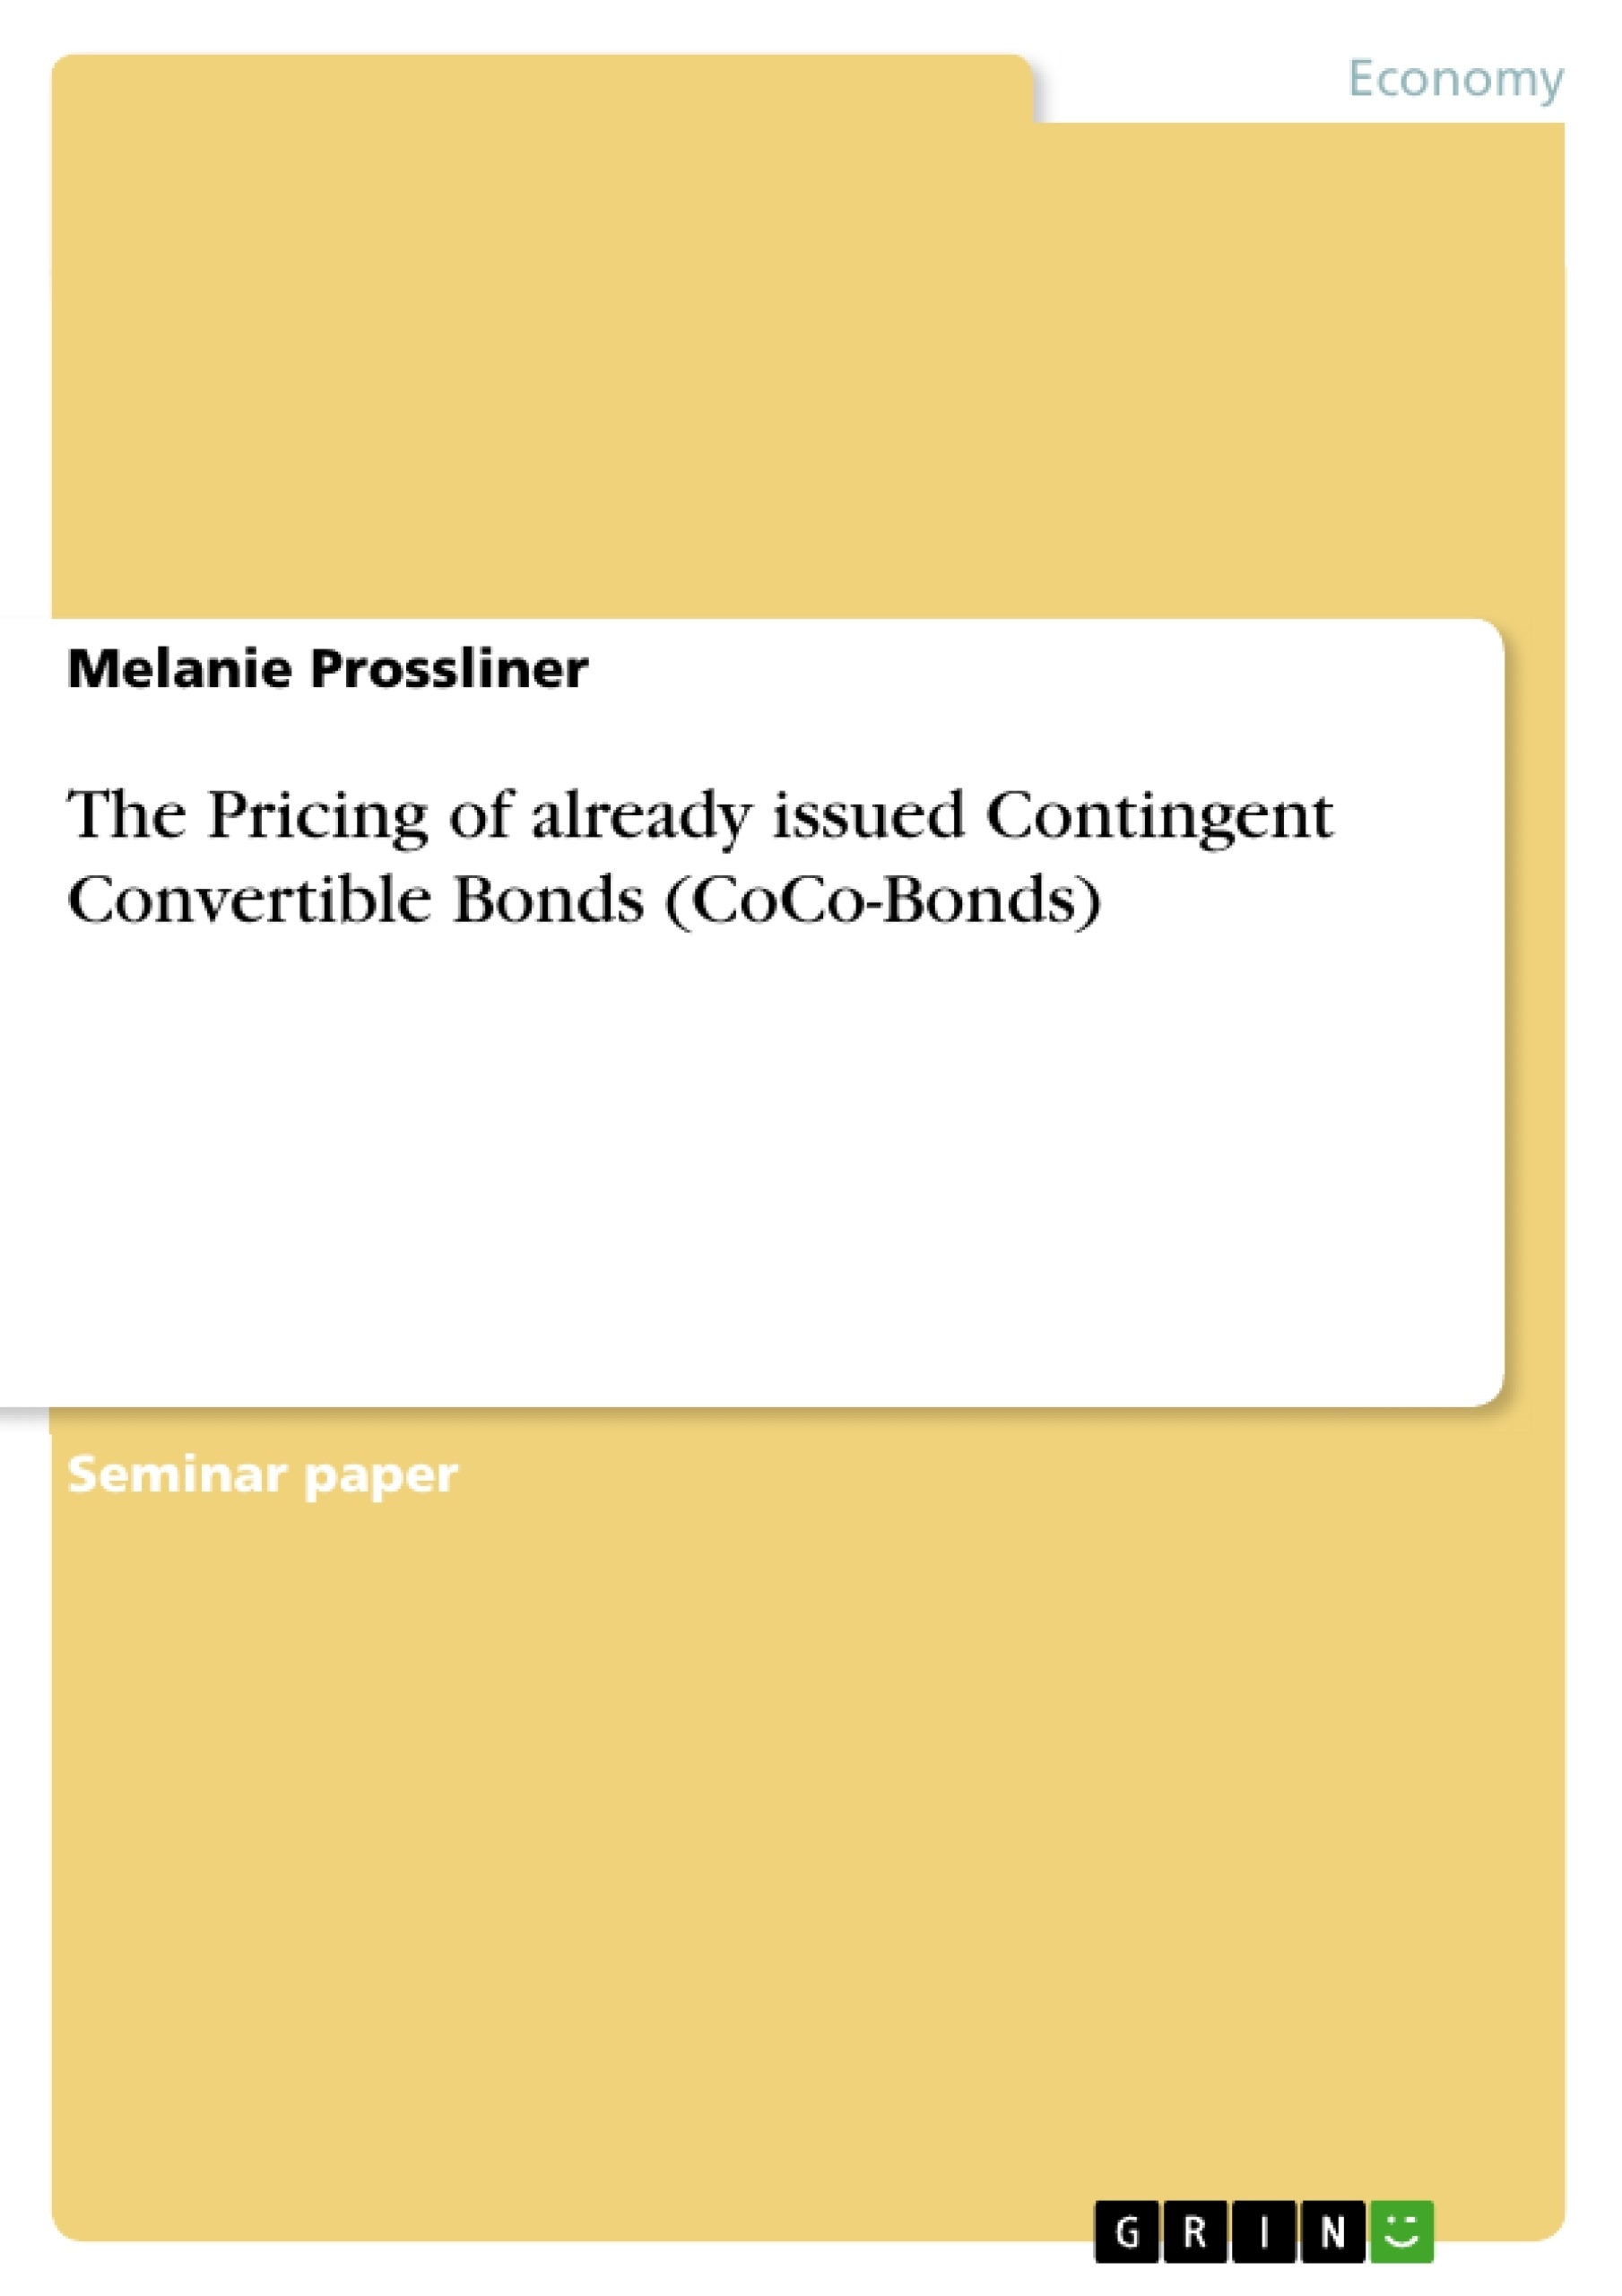 Titre: The Pricing of already issued Contingent Convertible Bonds (CoCo-Bonds)